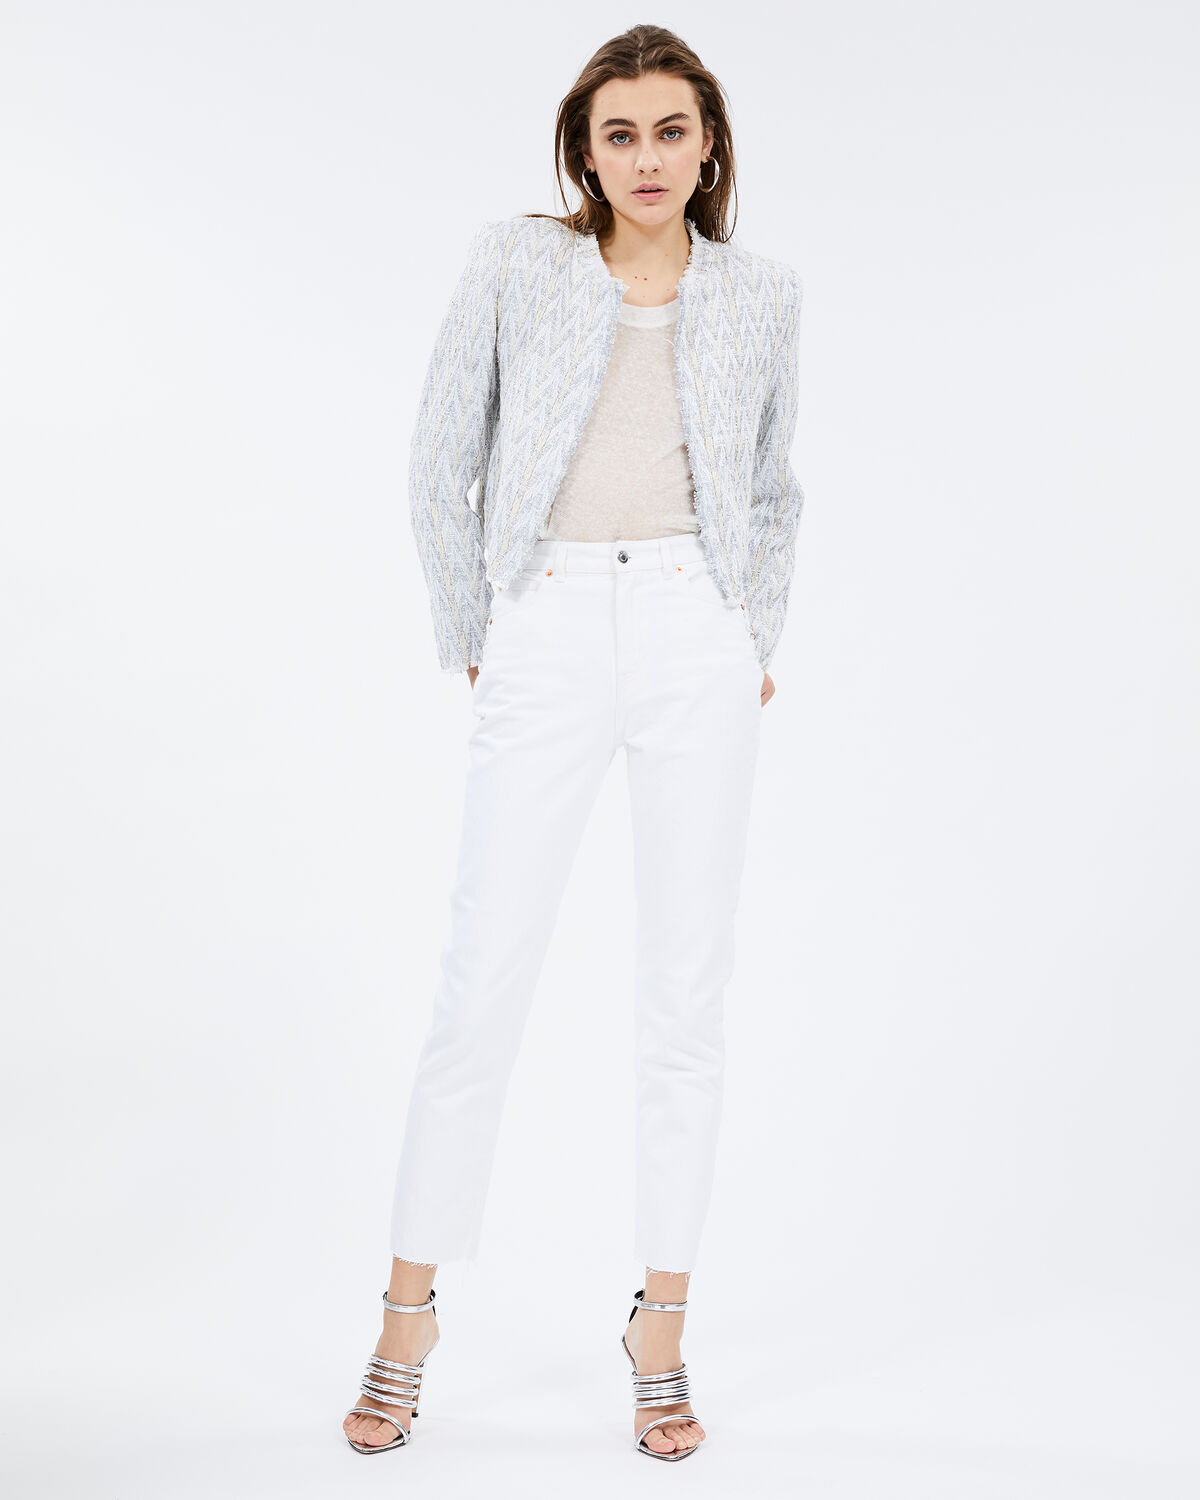 Photo of IRO Paris Makilo Jacket Grey - This Jacket Is Distinguished By Its Ethnic Pattern With A Golden And Silver Lurex. With Its Frayed Edges, It Will Add A Touch Of Shine To Your Outfits. Dare A Total White Look For A Chic And Refined Silhouette. Spring Summer 19